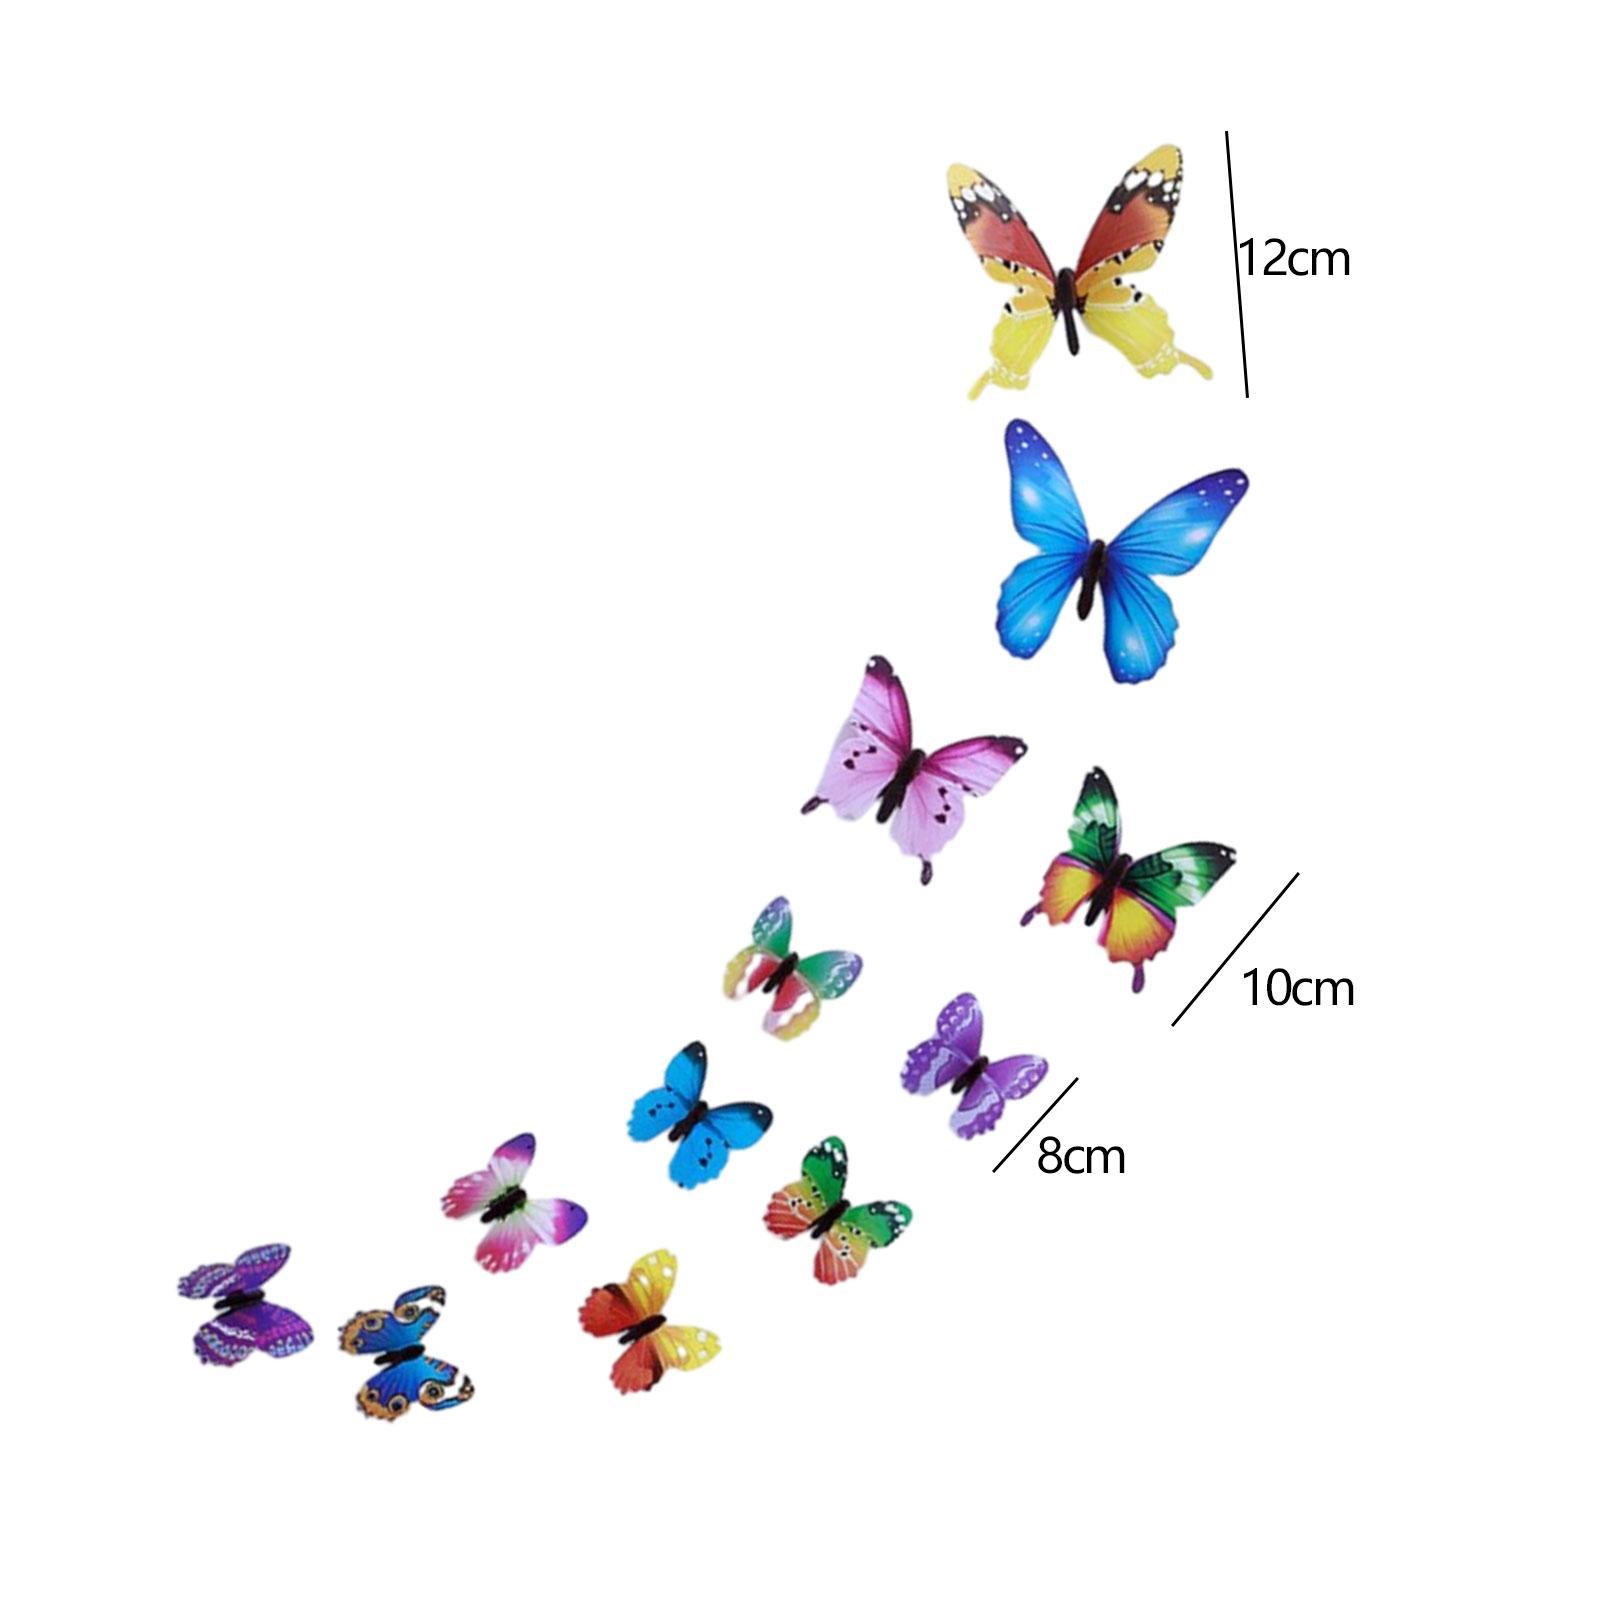 12Pcs 3D Luminous Butterfly Wall Stickers PVC for Corridor Party Living Room